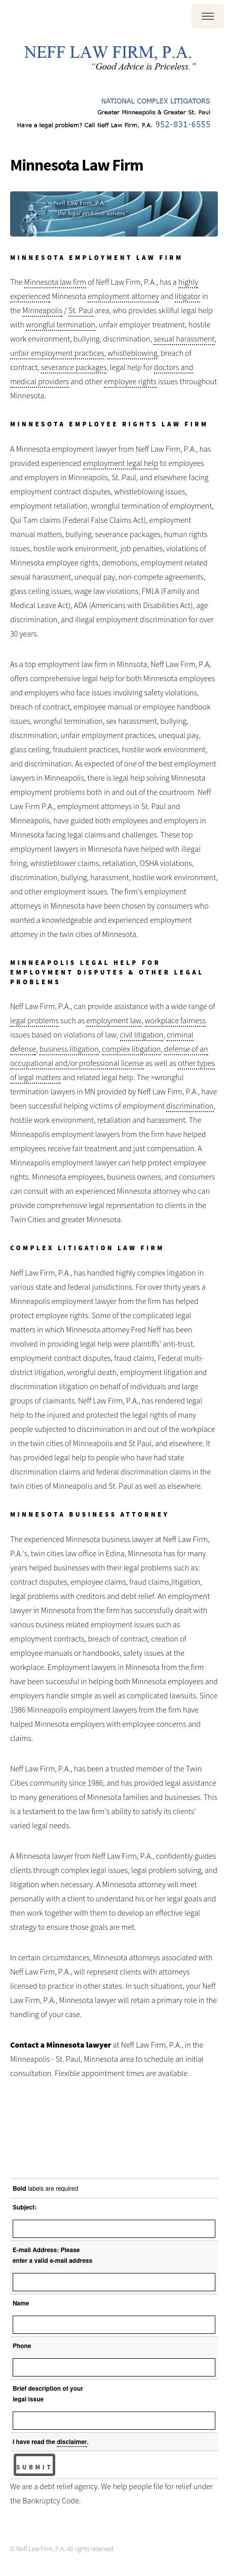 Neff Law Firm, P.A. - Roseville MN Lawyers